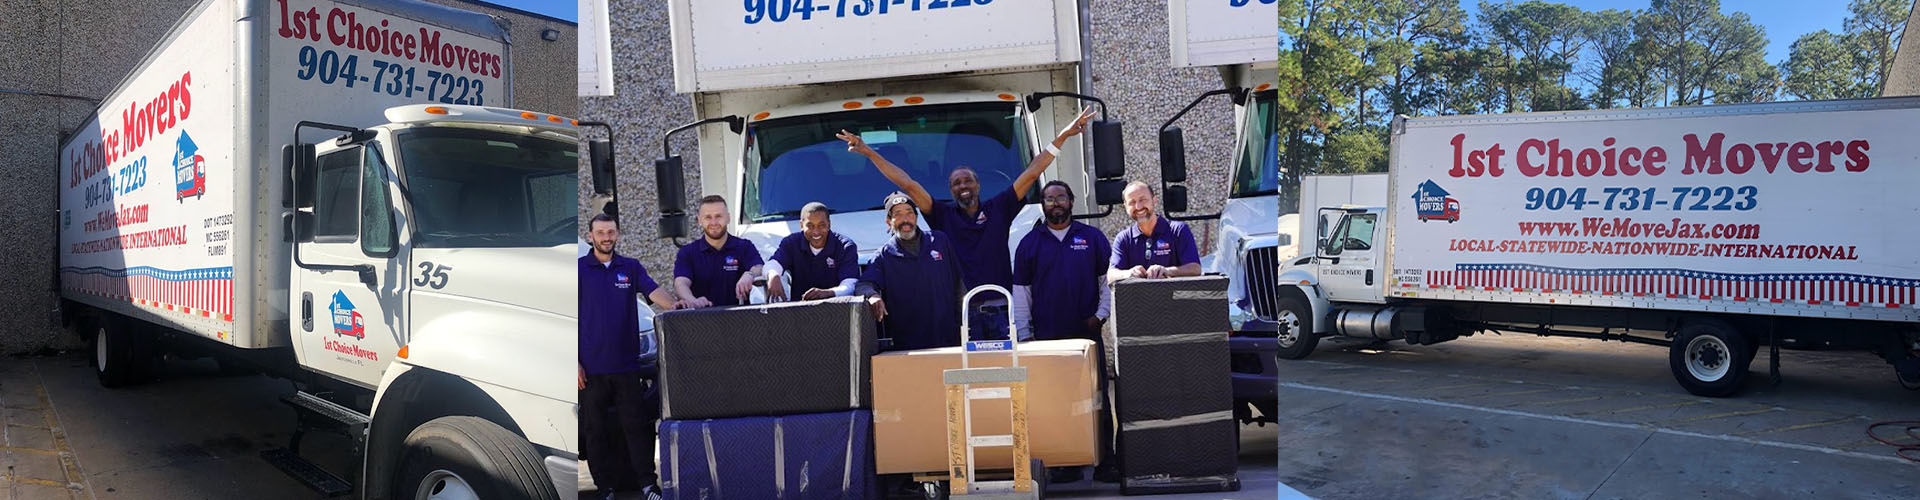 Explore our exceptional customer support throughout the interstate moving process.